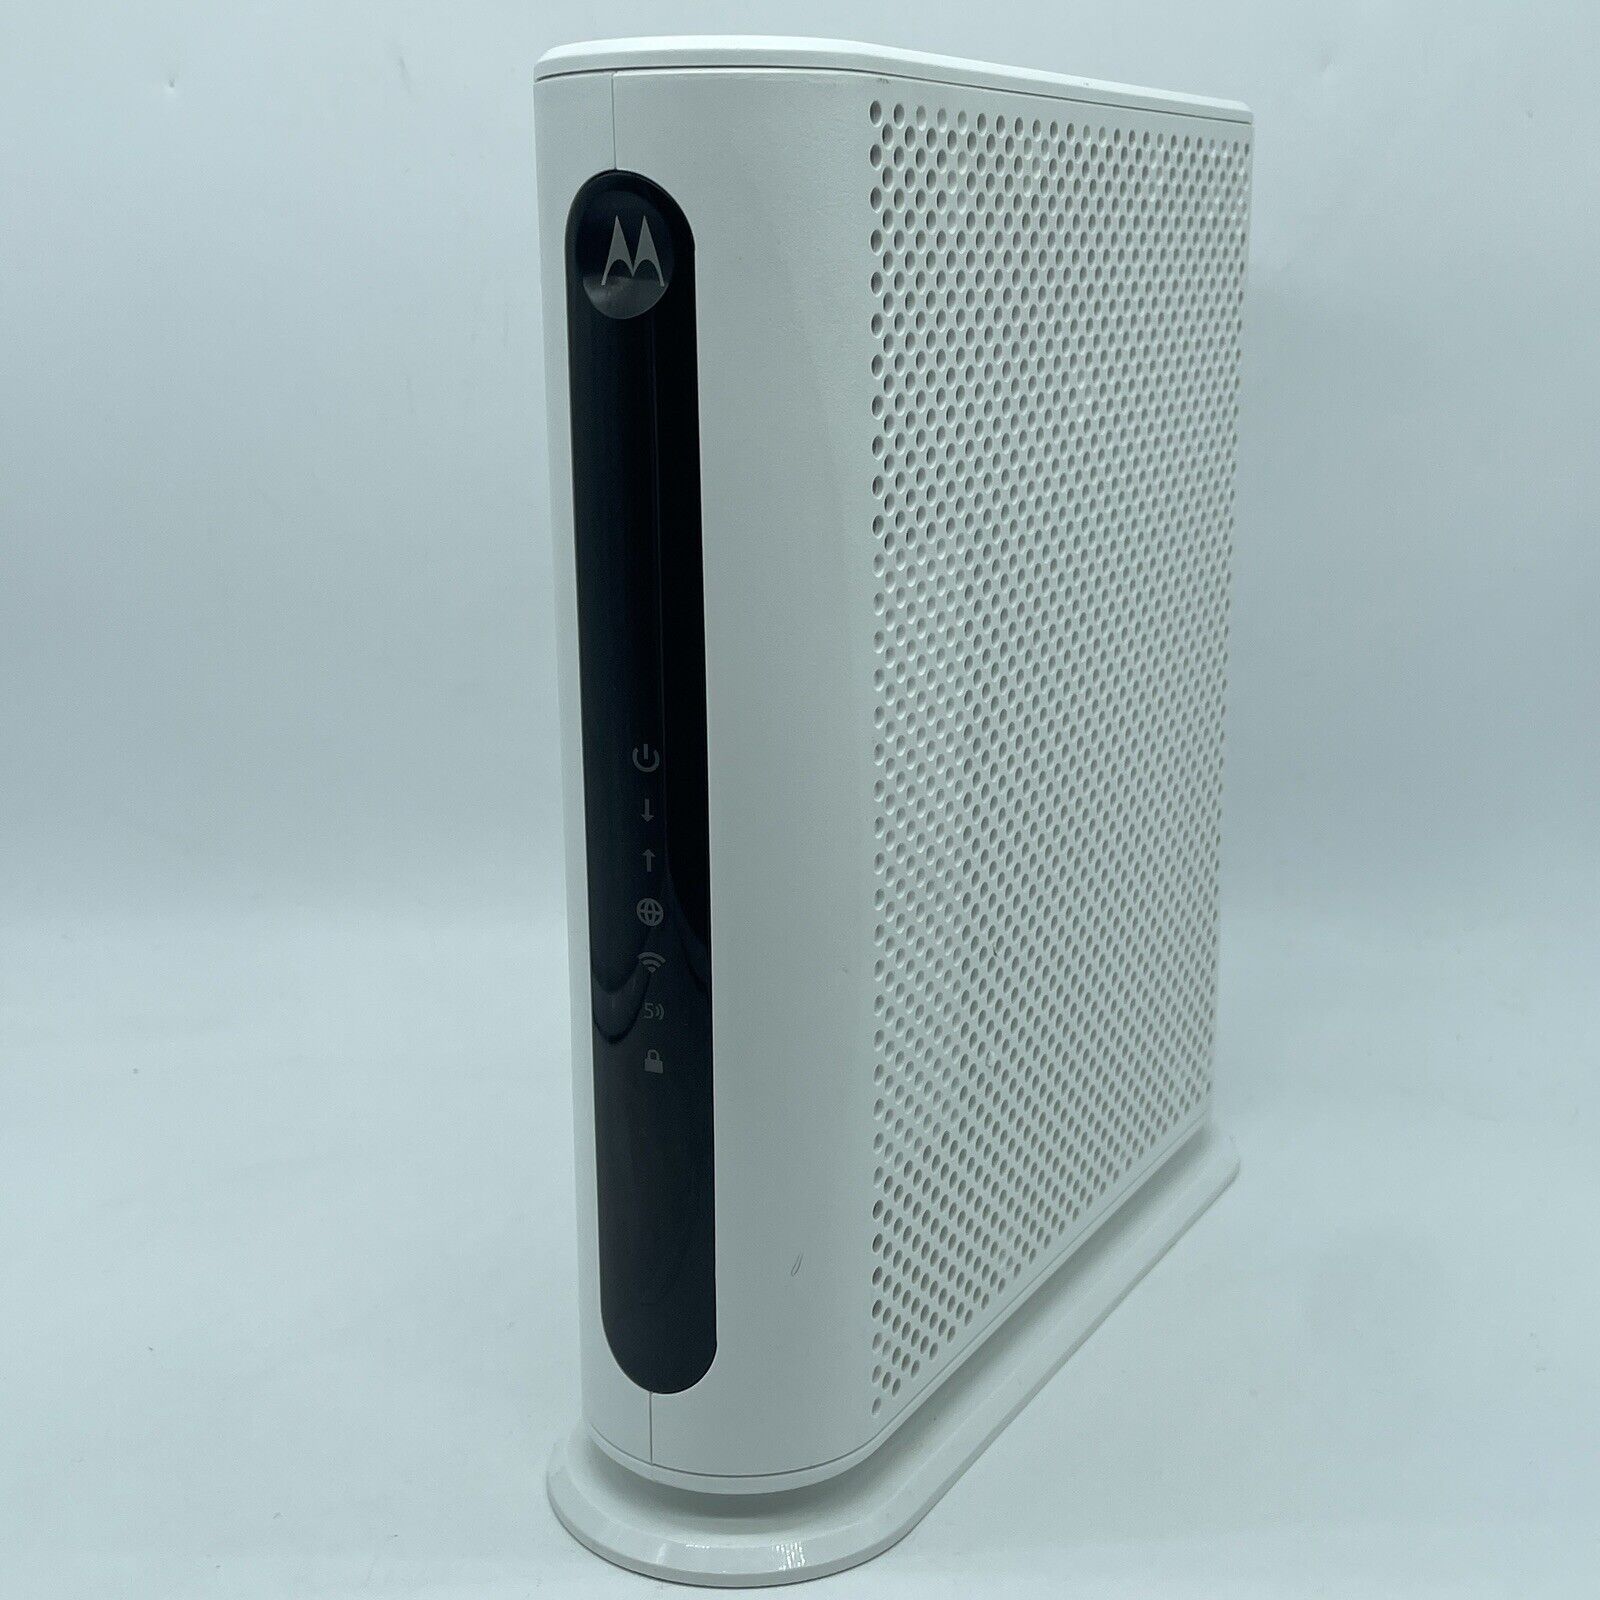 Motorola 16x4 DOCSIS 3.0 AC1900 Router Model MG7550 Unit ONLY - White